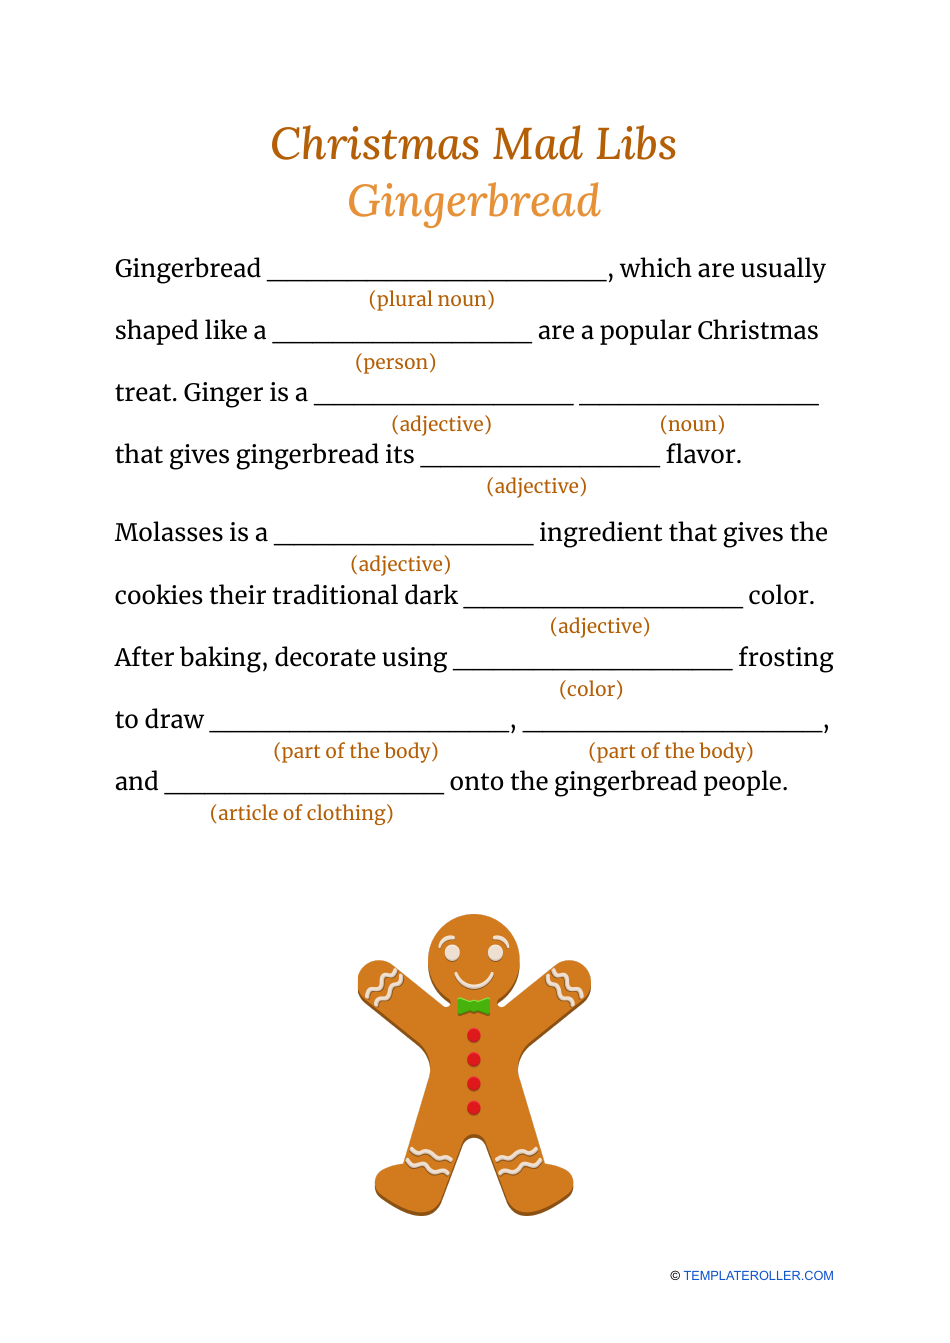 Christmas Mad Libs - Gingerbread Image Preview